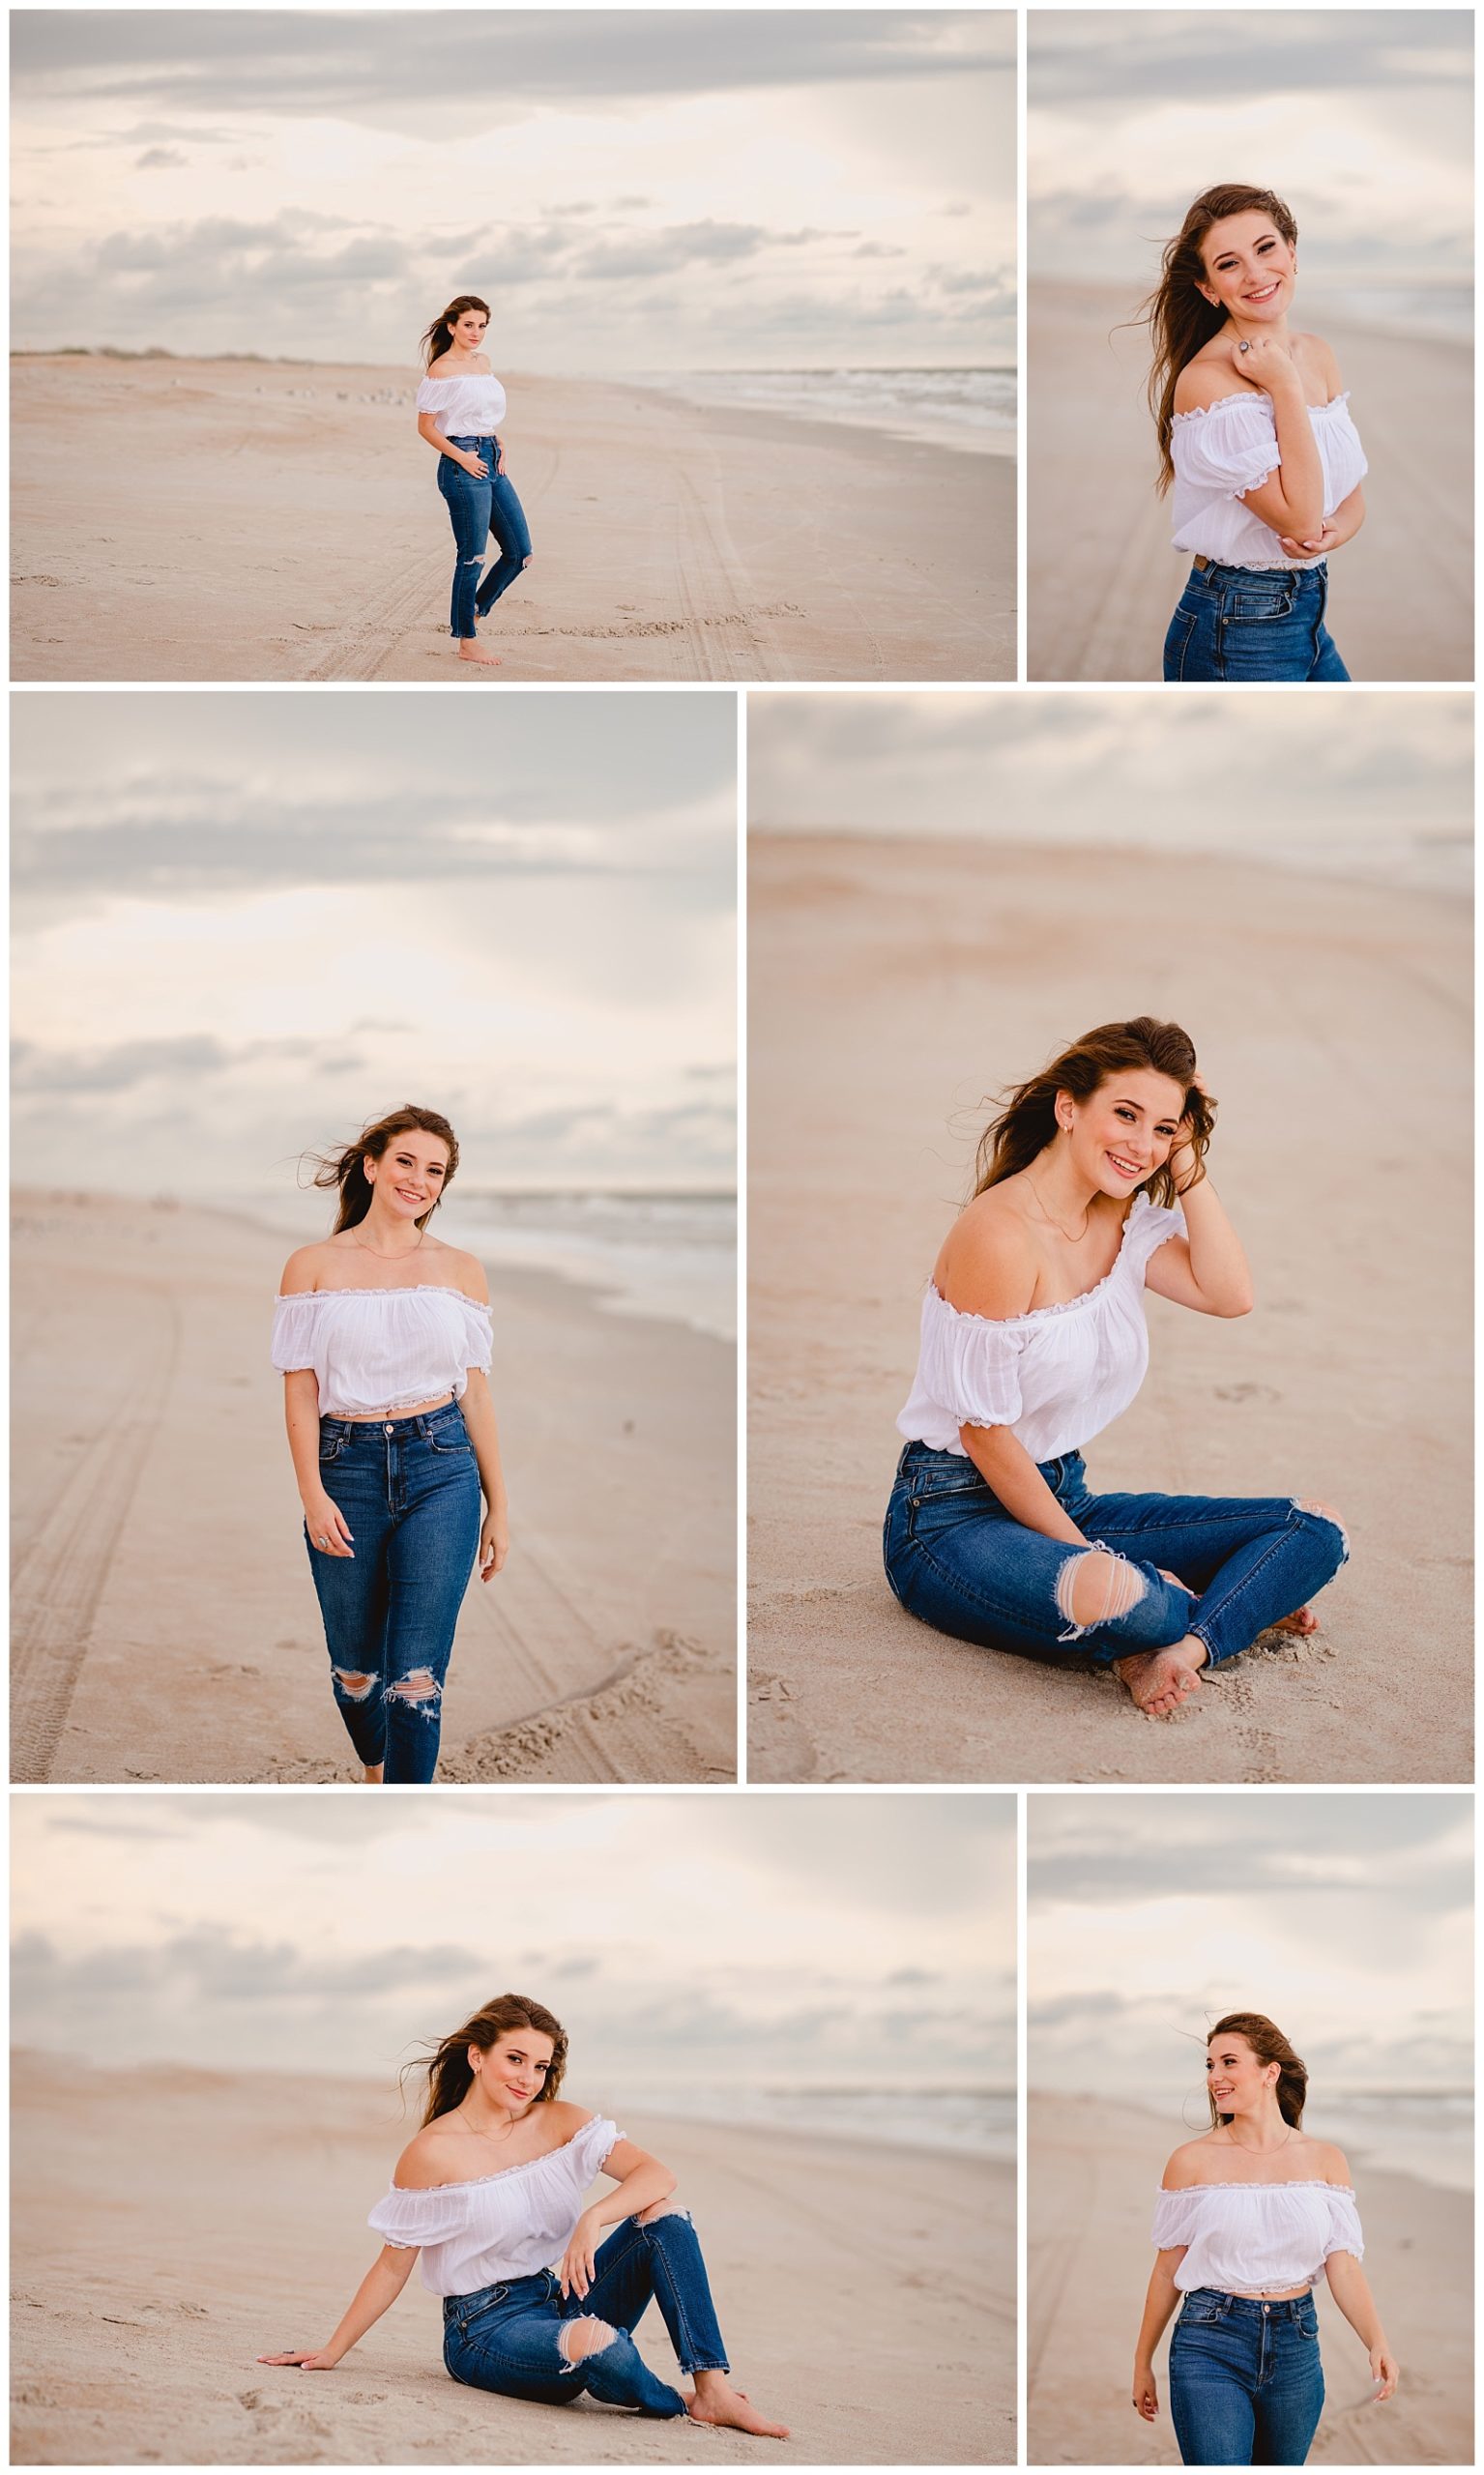 Poses for senior photos on the beach in white shirt and jeans. Florida beaches. Shelly Williams Photography.